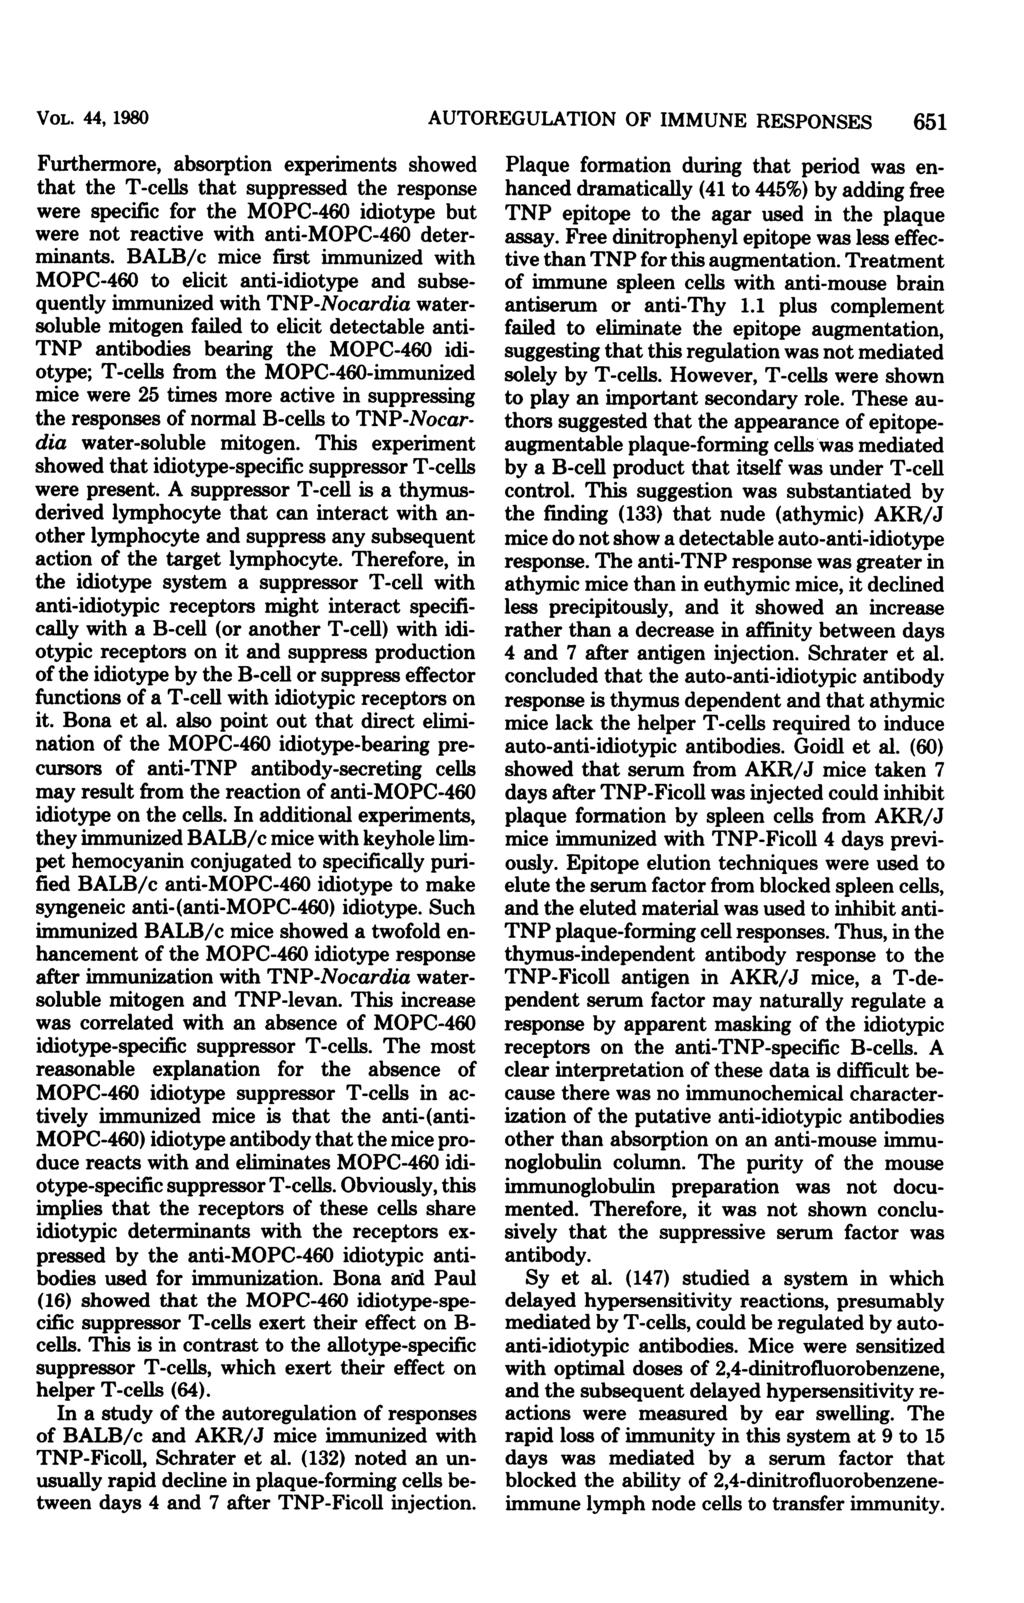 VOL. 44, 1980 Furthermore, absorption experiments showed that the T-cells that suppressed the response were specific for the MOPC-460 idiotype but were not reactive with anti-mopc-460 determinants.